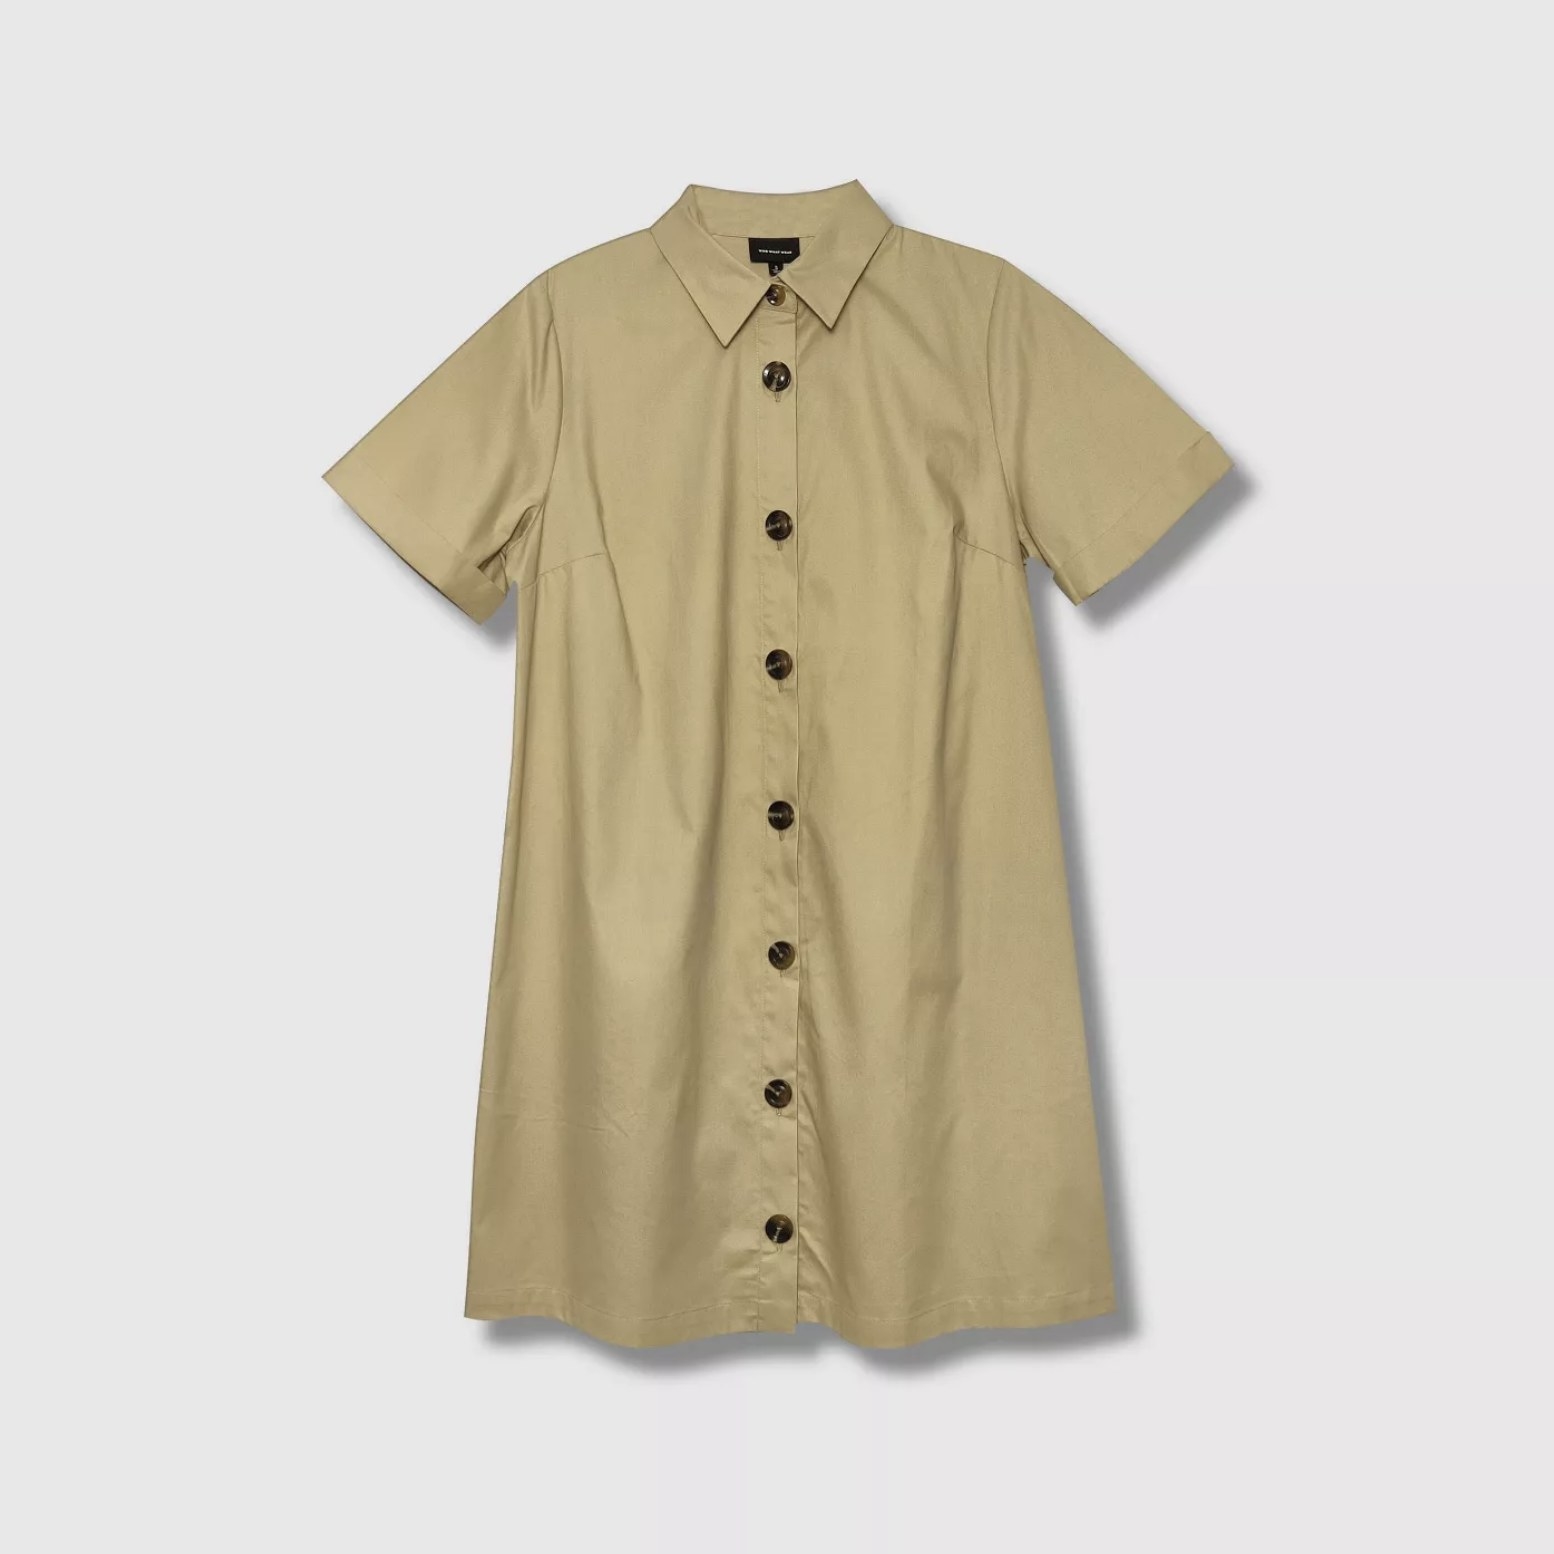 An image of a khaki midi short sleeve dress with big black buttons down the front and a collared neckline